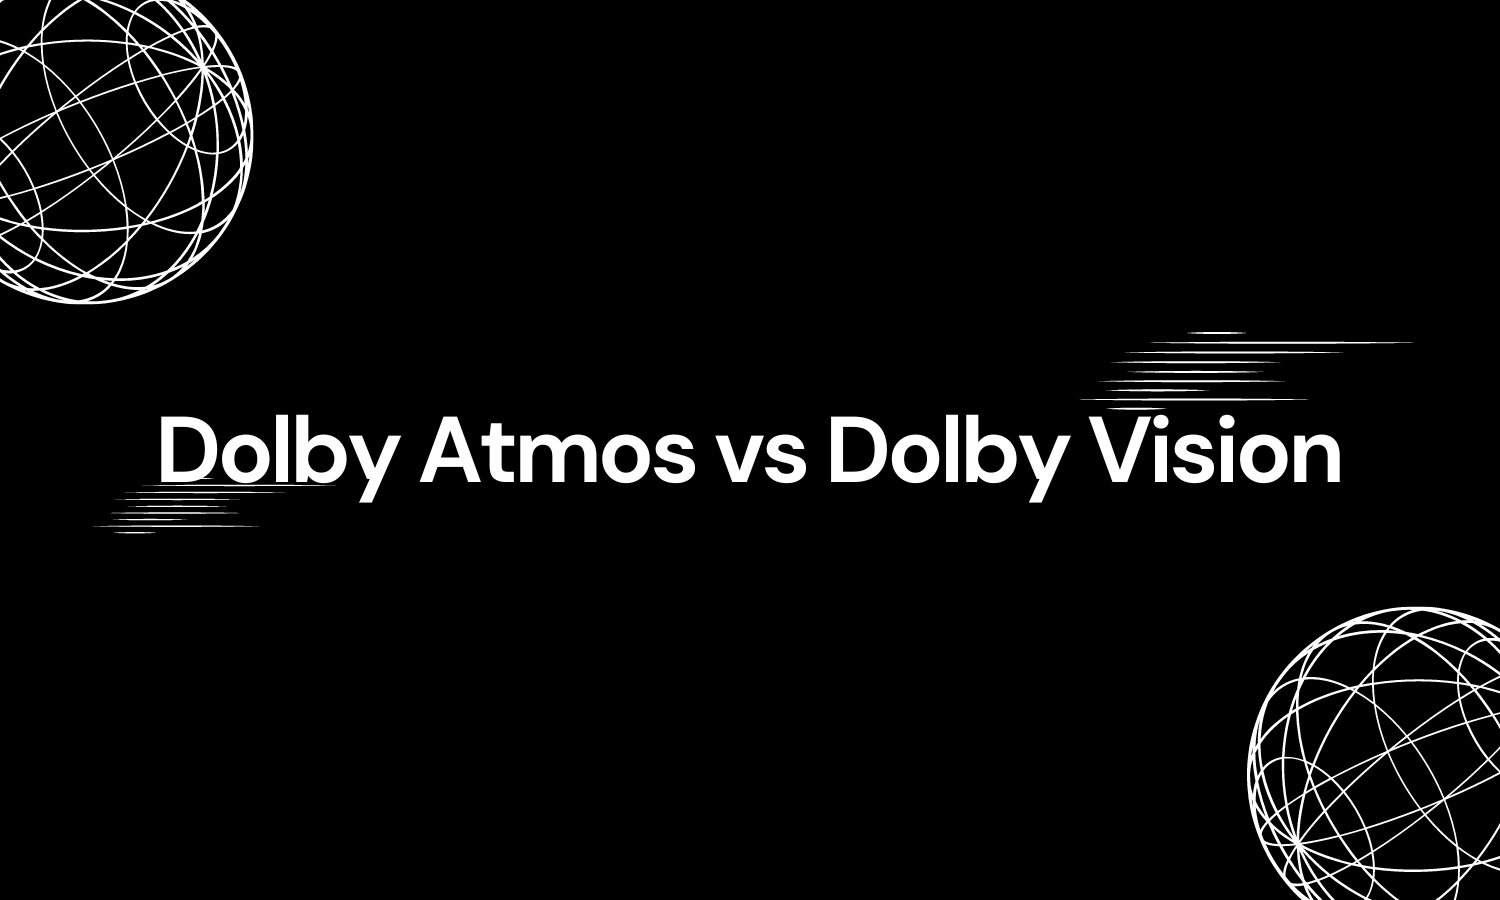 T3 explains: What are Dolby Atmos and Dolby Vision?